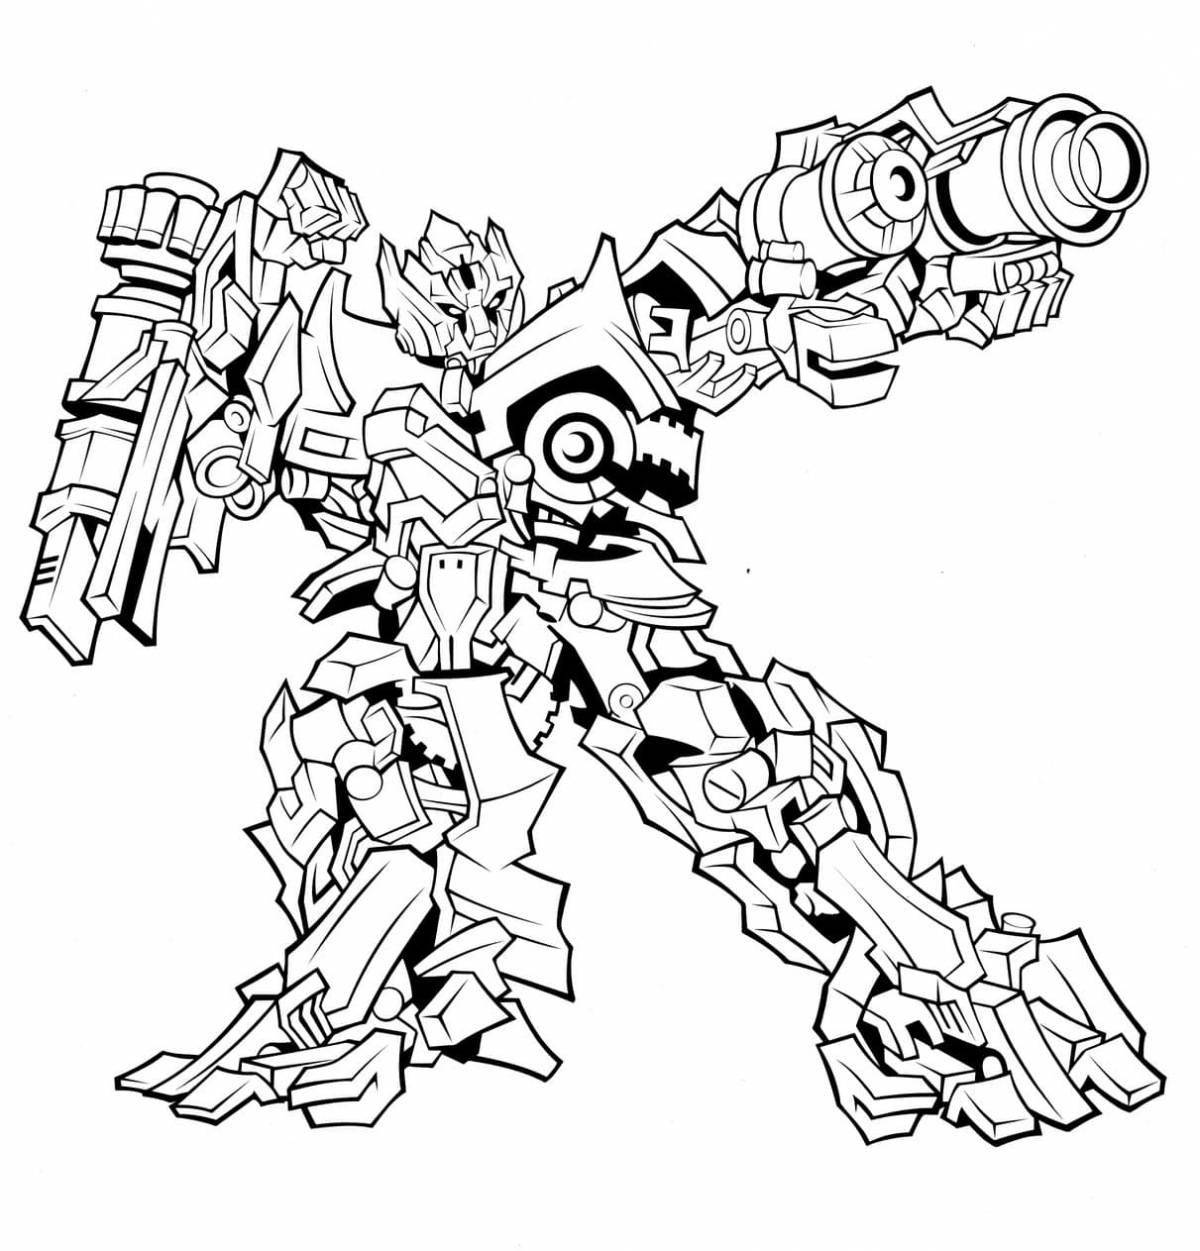 Coloring transformers for children 6-7 years old